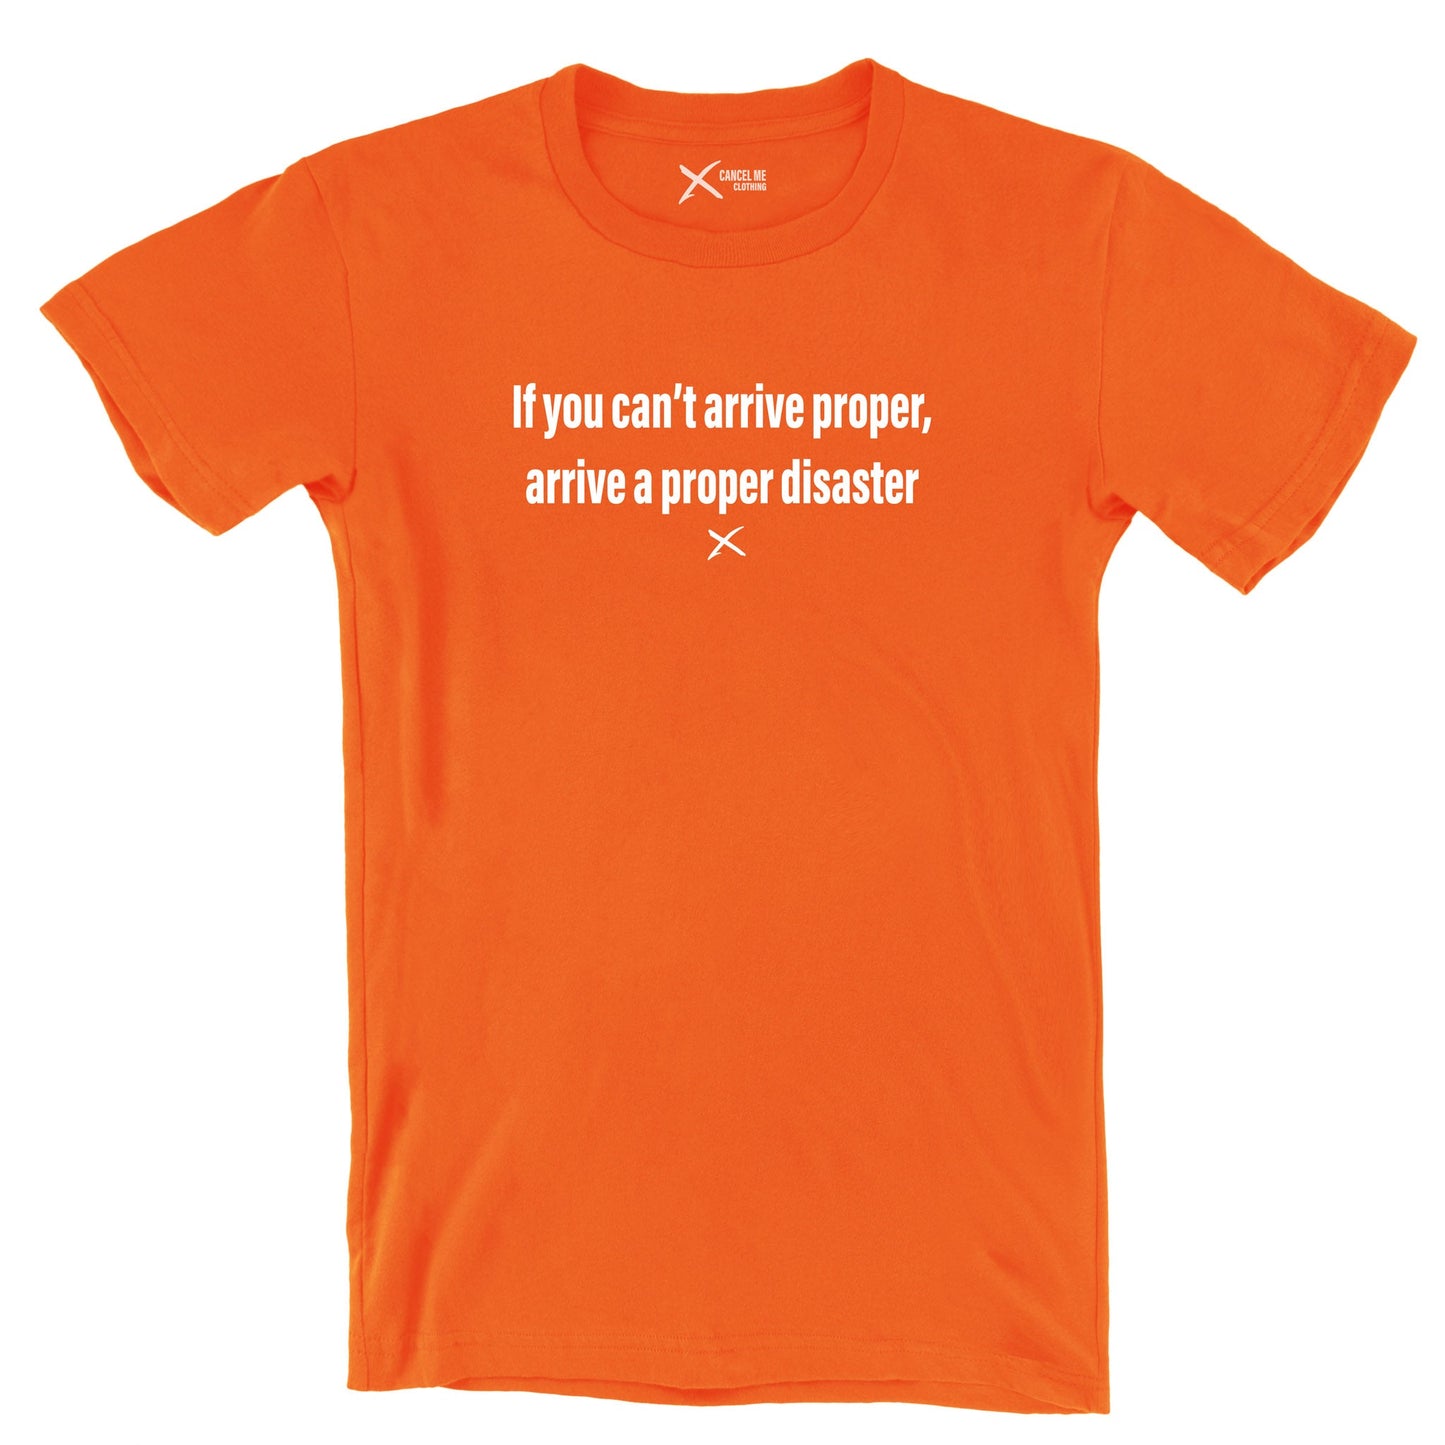 If you can't arrive proper, arrive a proper disaster - Shirt